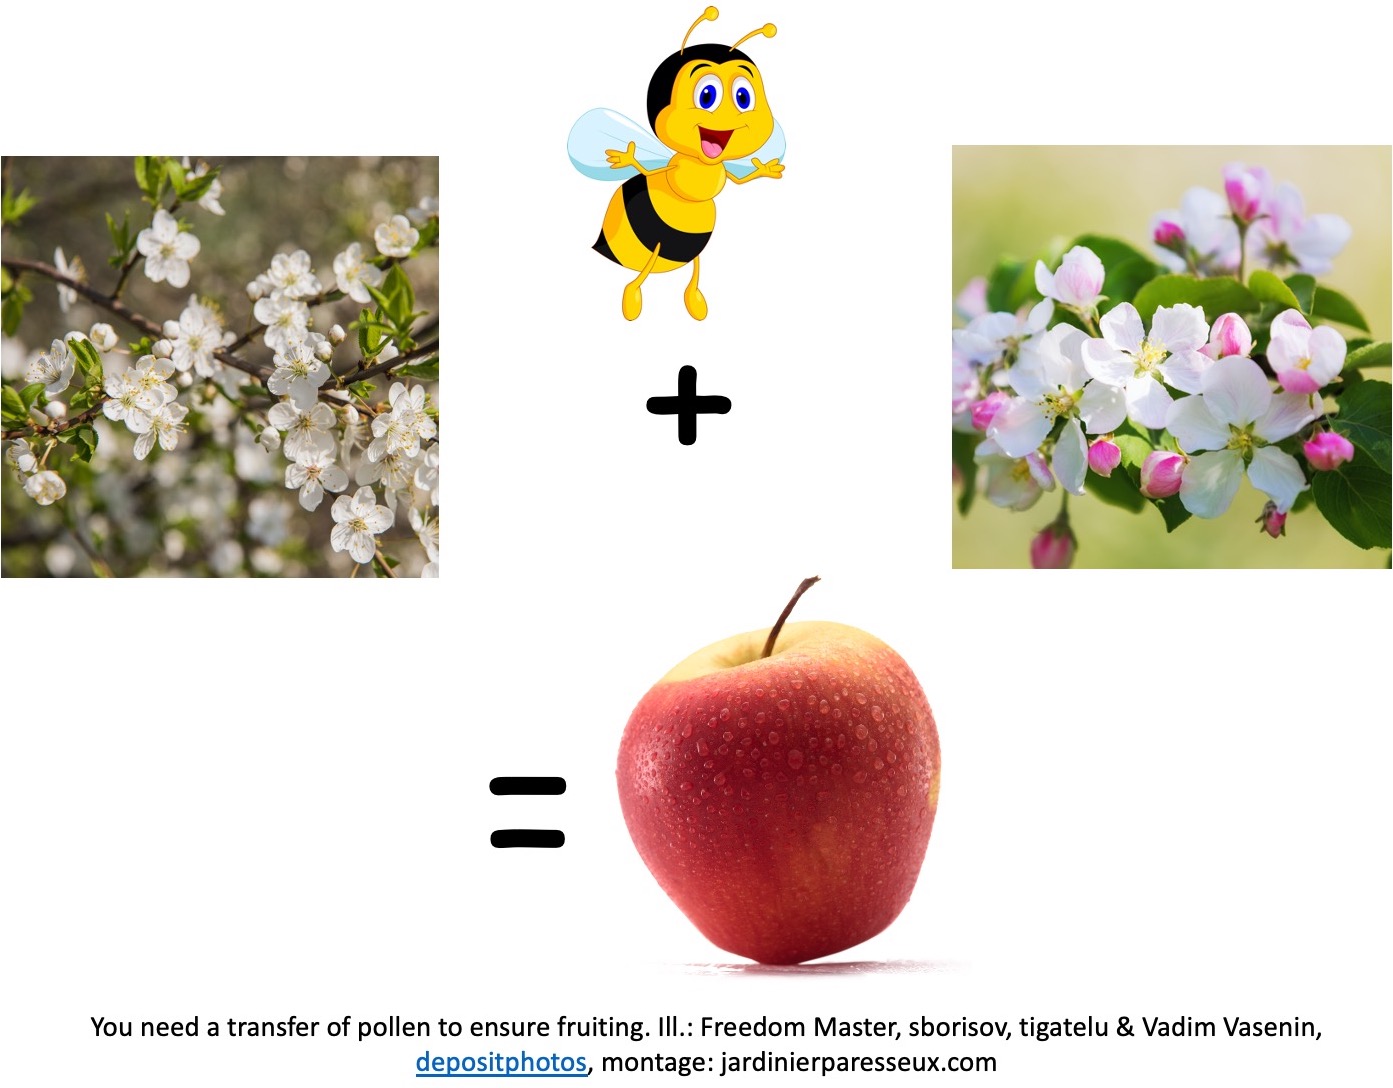 Bee carrying pollen from one apple blossom to another, resulting in an apple.